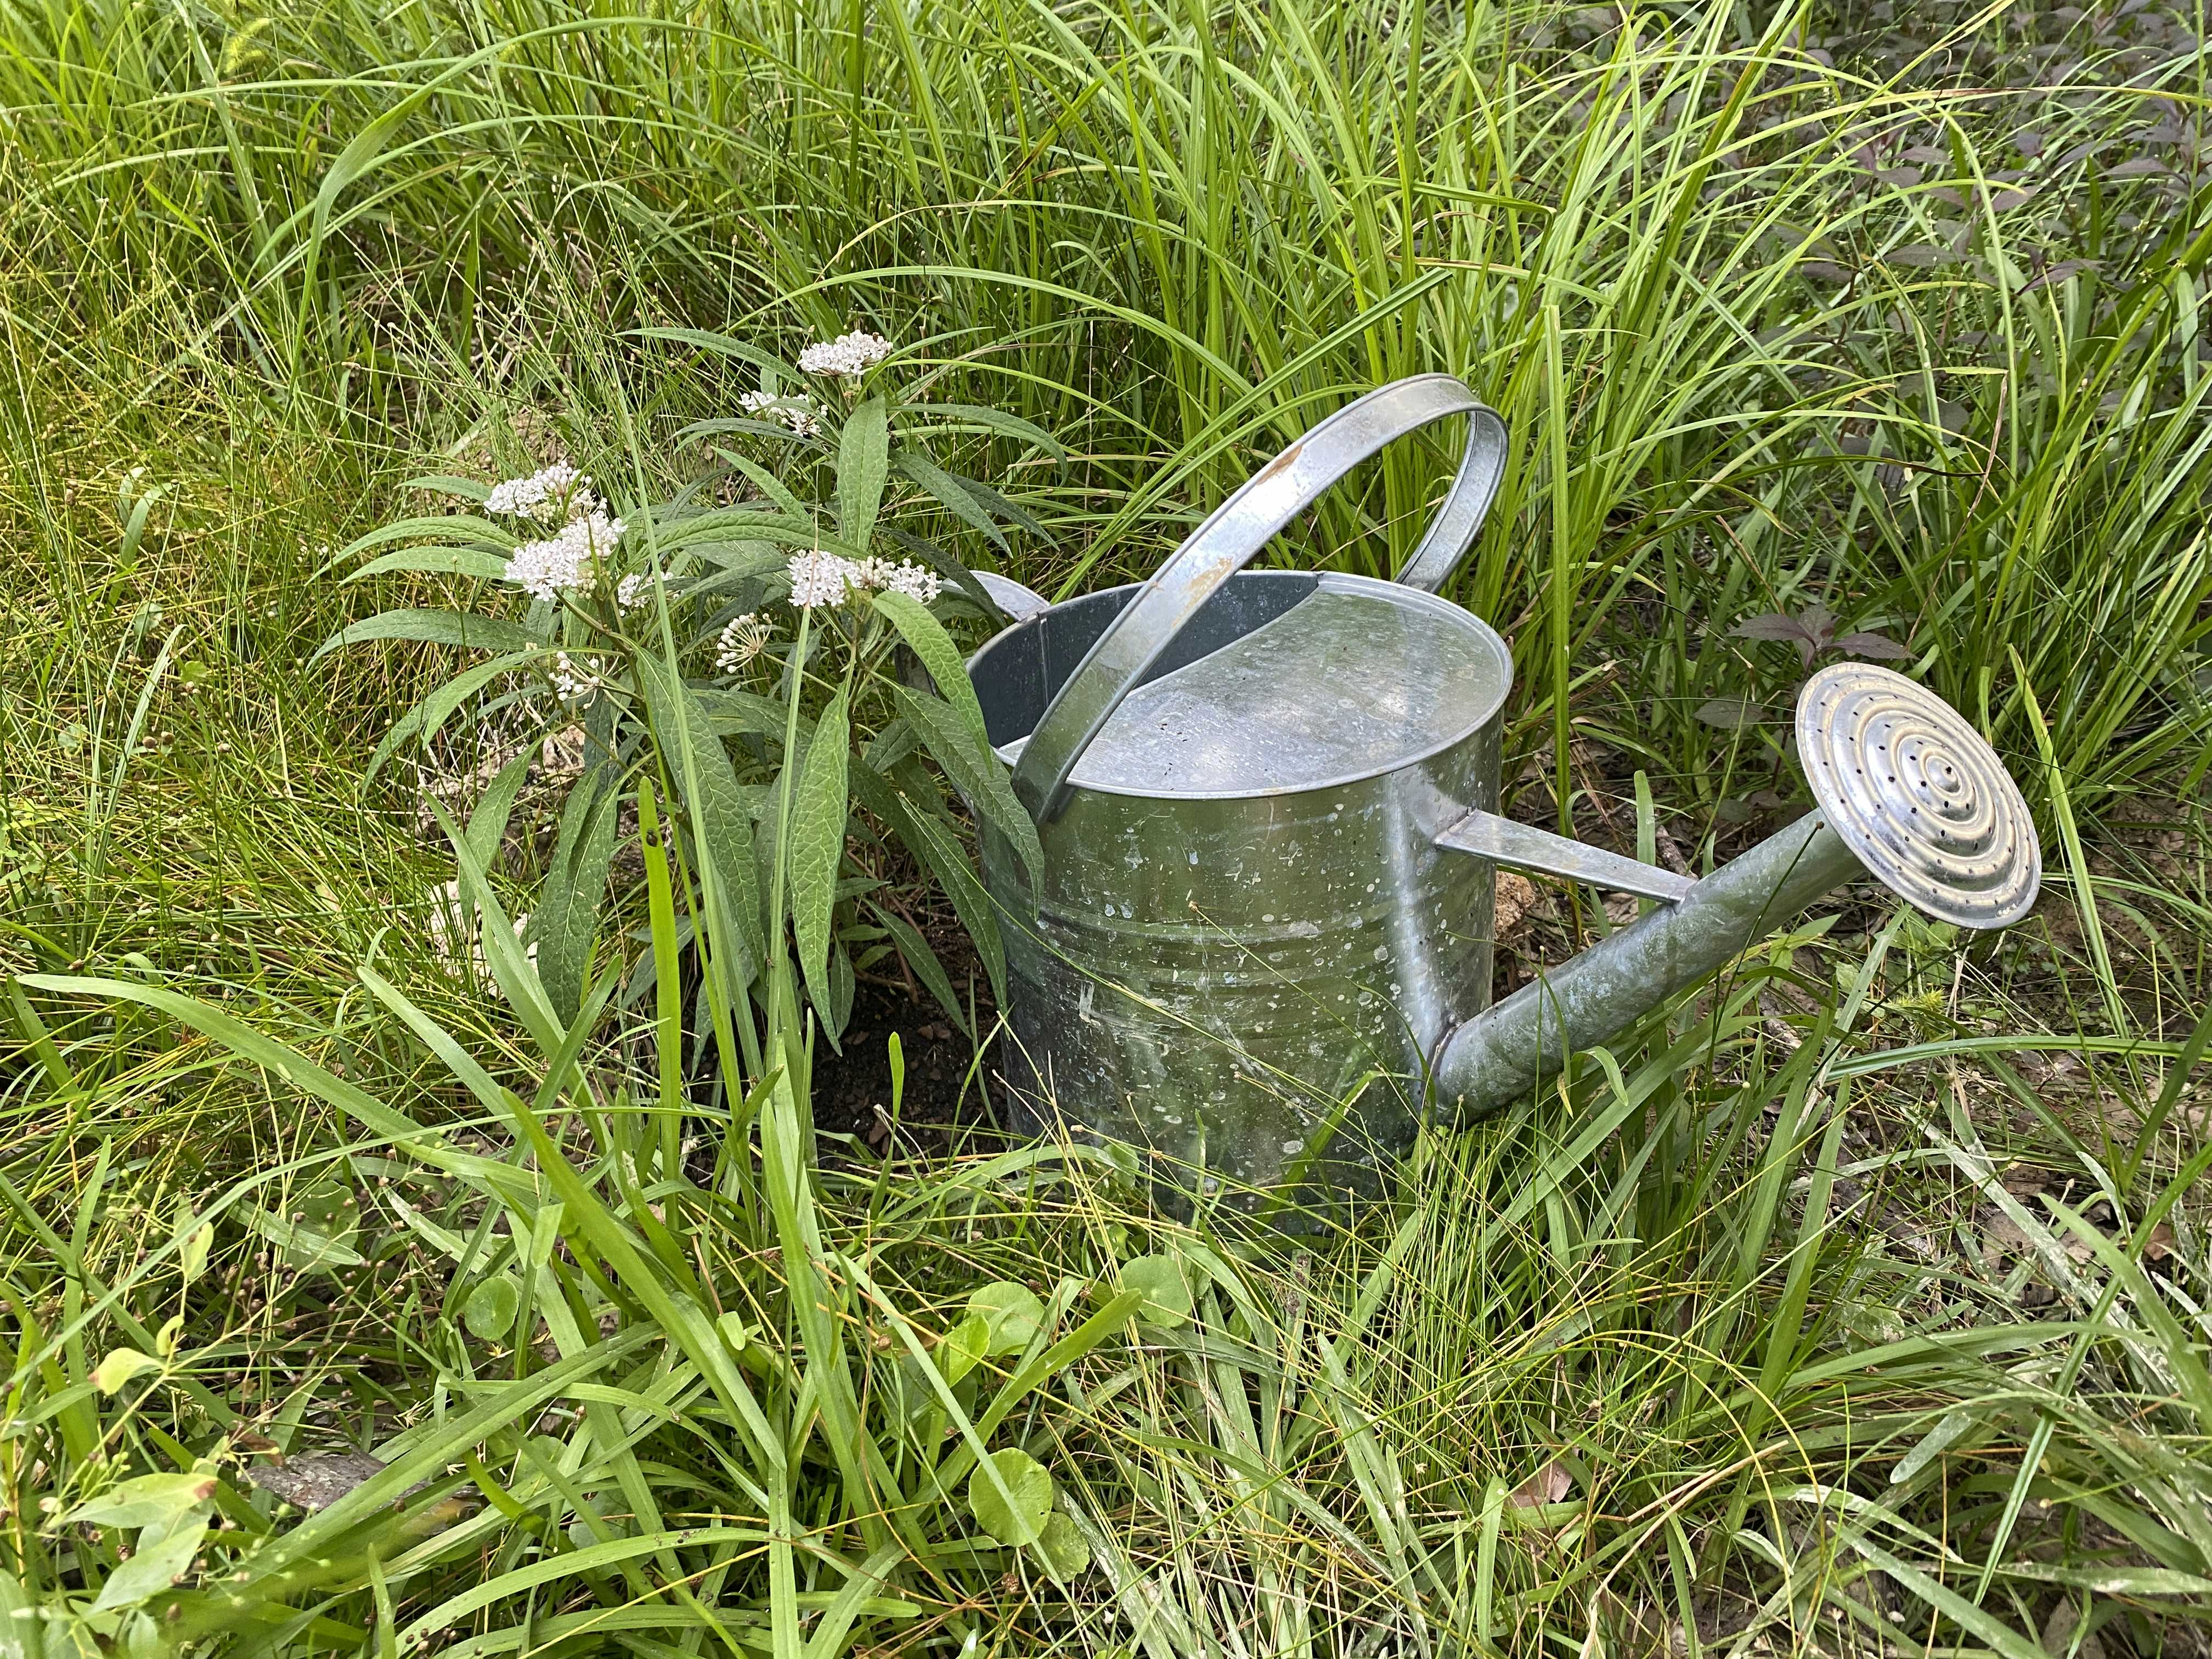 A watering can next to an Aquatic Milkweed, surrounded by long green grasses and sedges